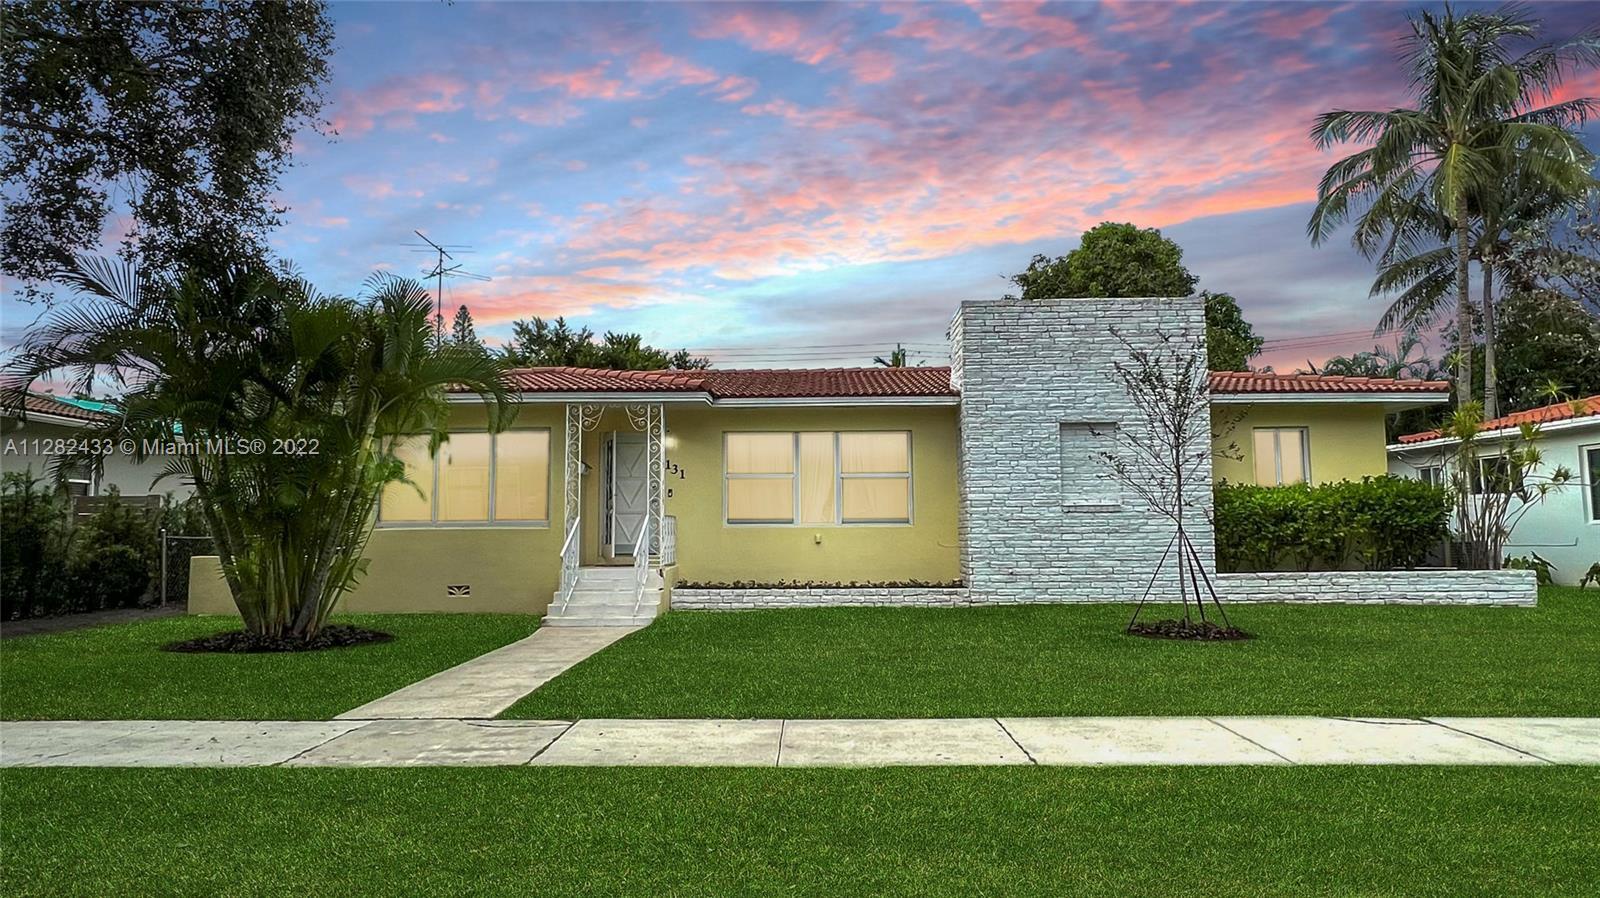 Location, Location, Location!!  Here's your chance to own a Shores mid-century modern beauty, just s